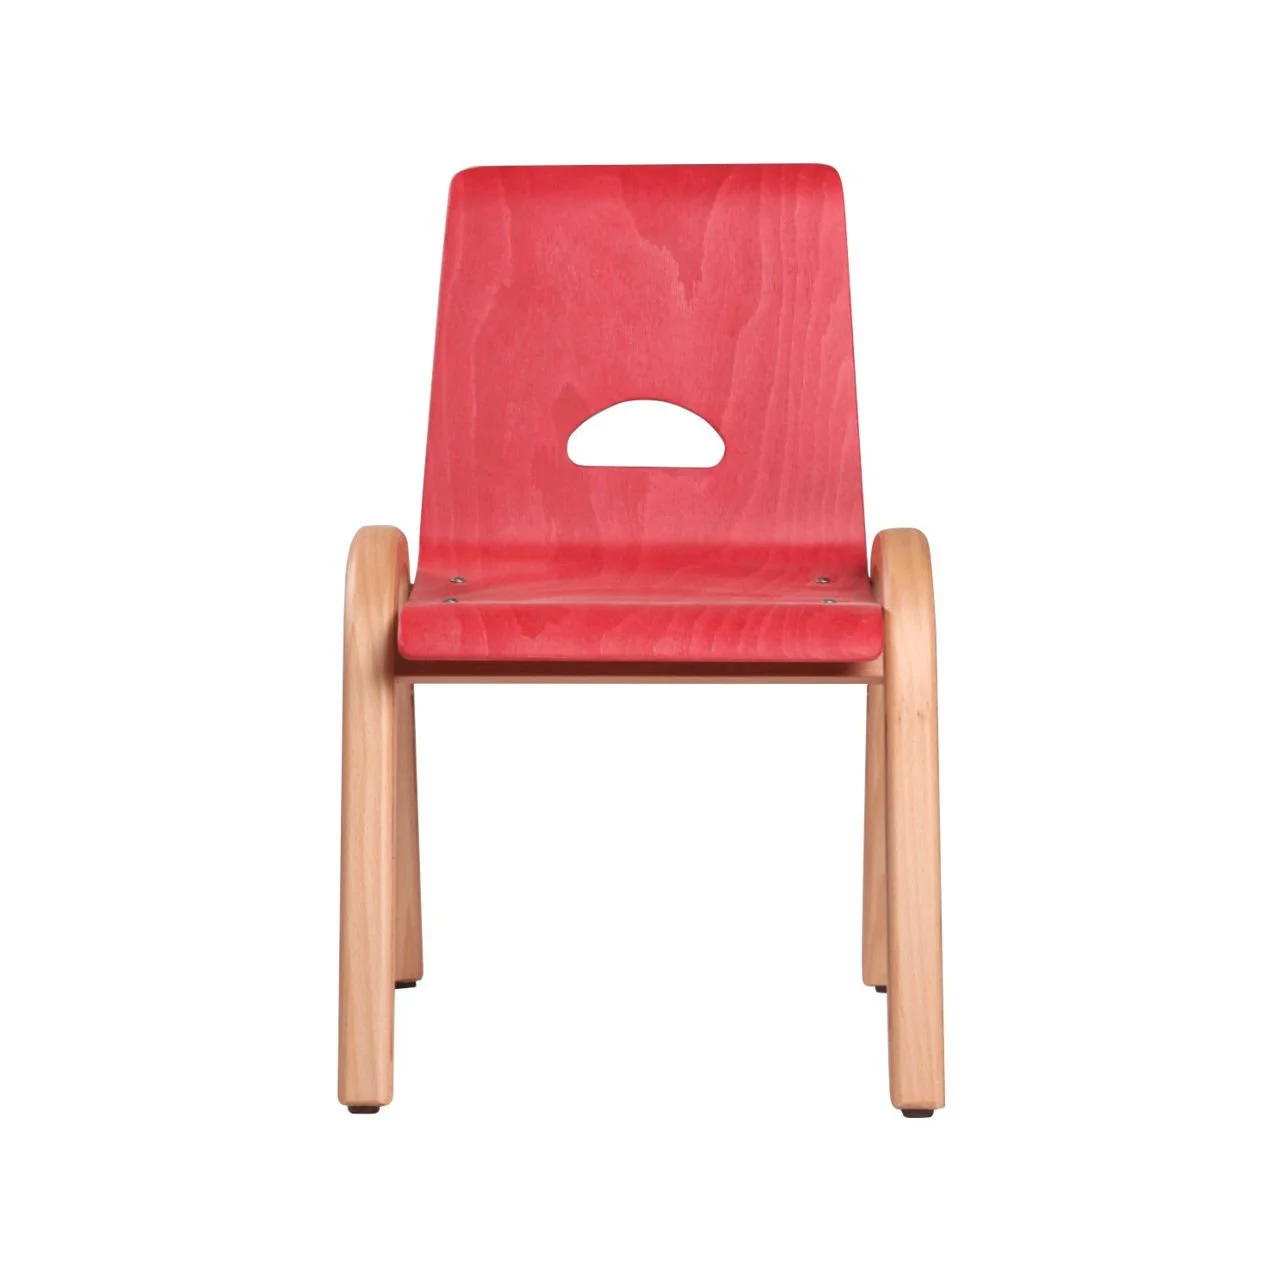 0.29 Kids Chair Red